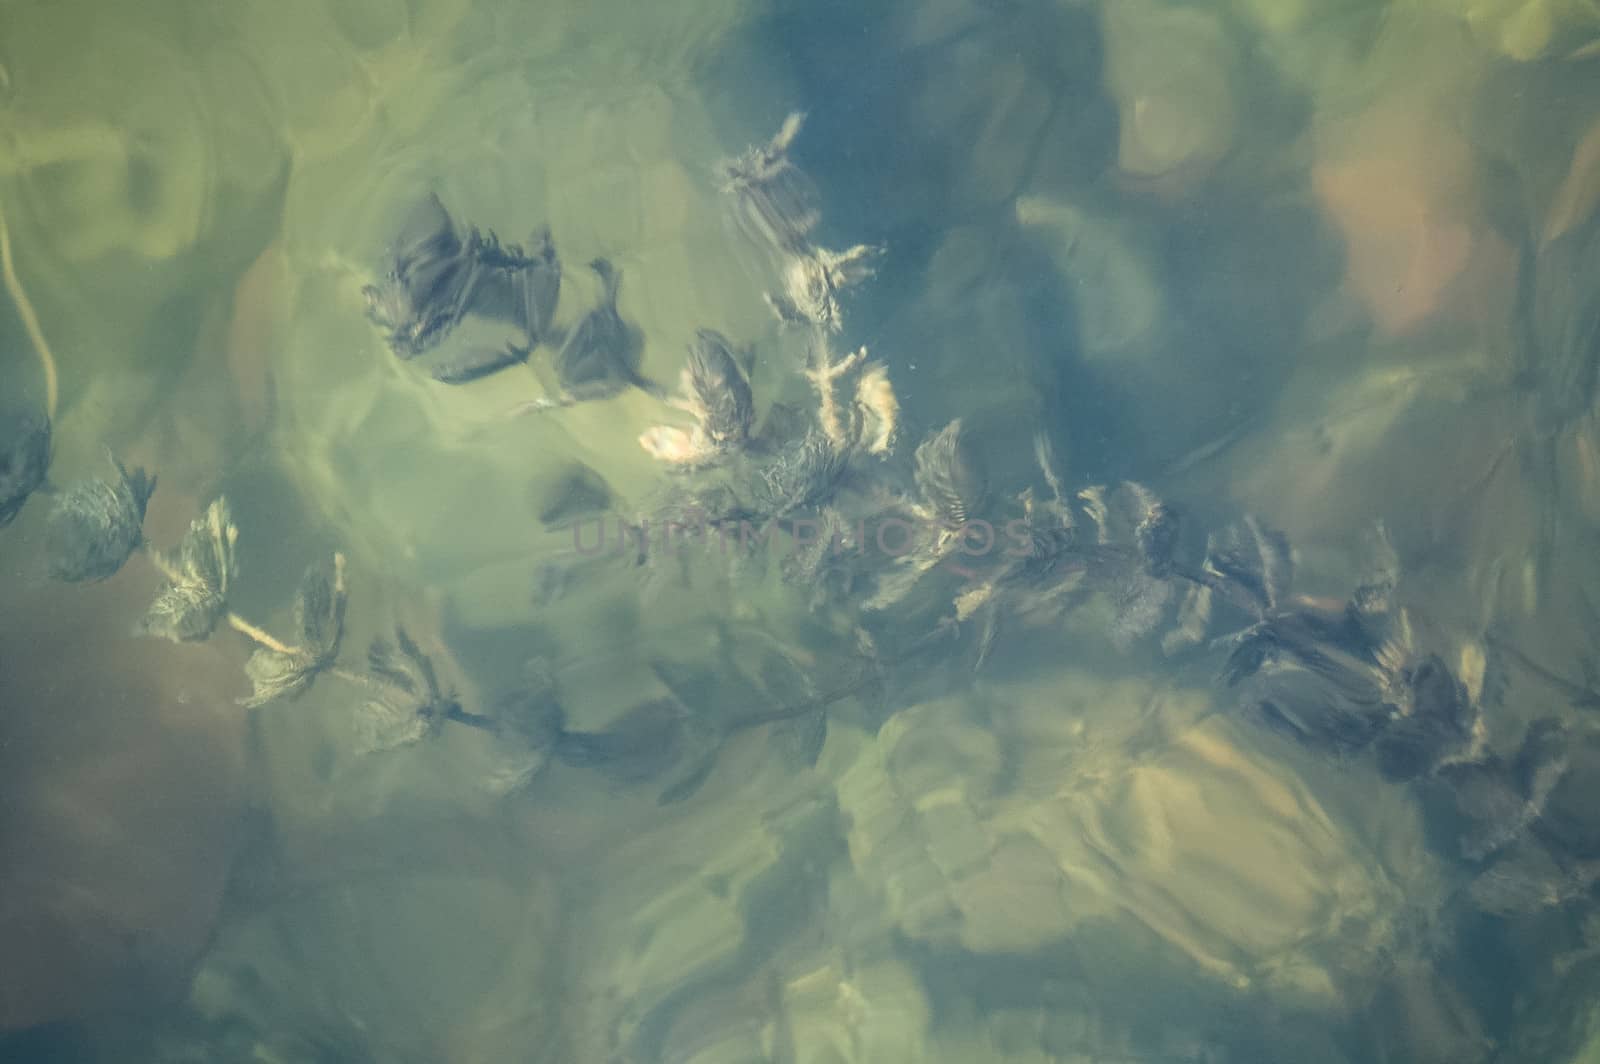 Underwater plant shot from above, visible stones, plants, water, abstract, greenish shade.